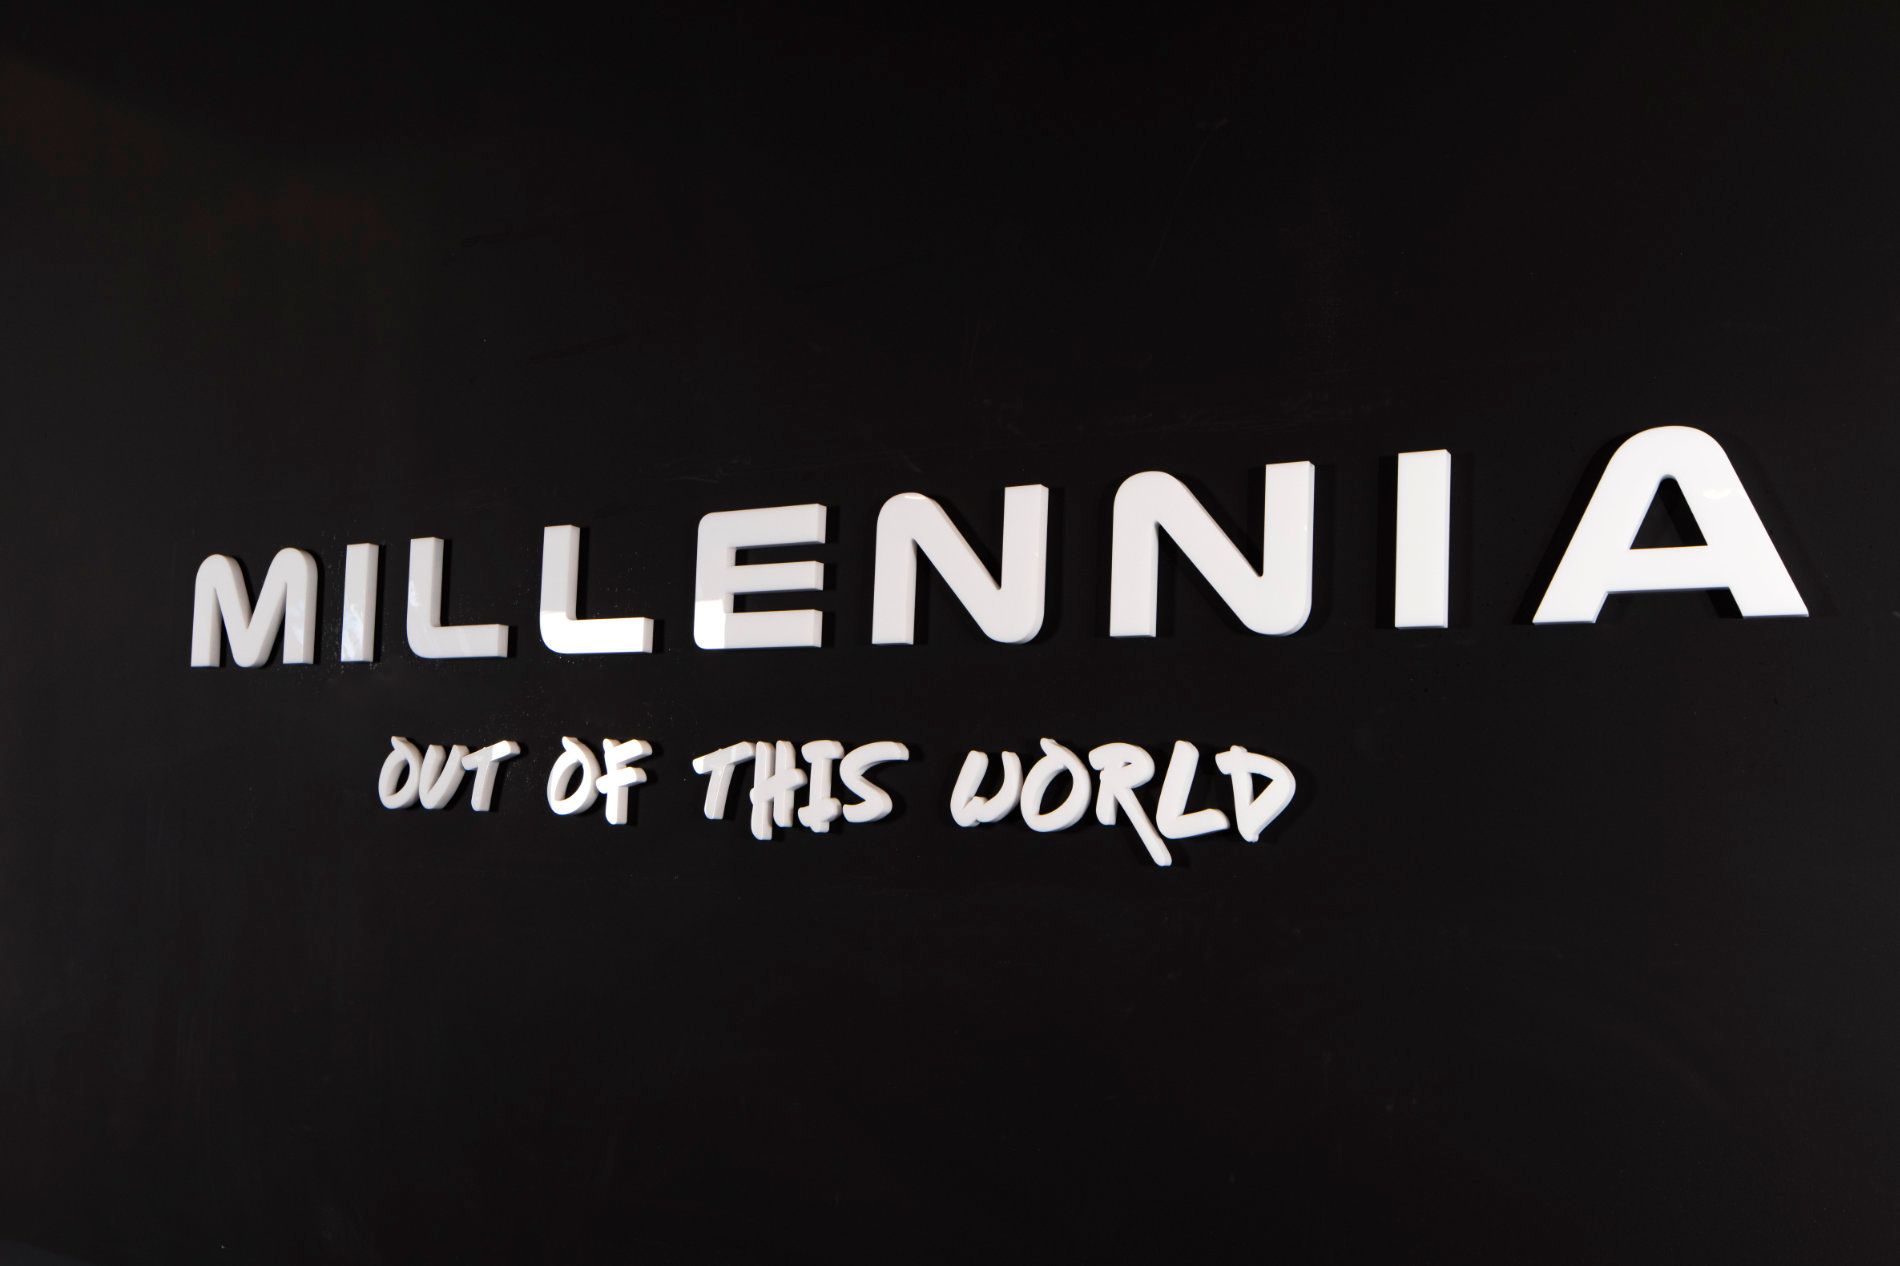 millennia out of this world is written in white on a black background